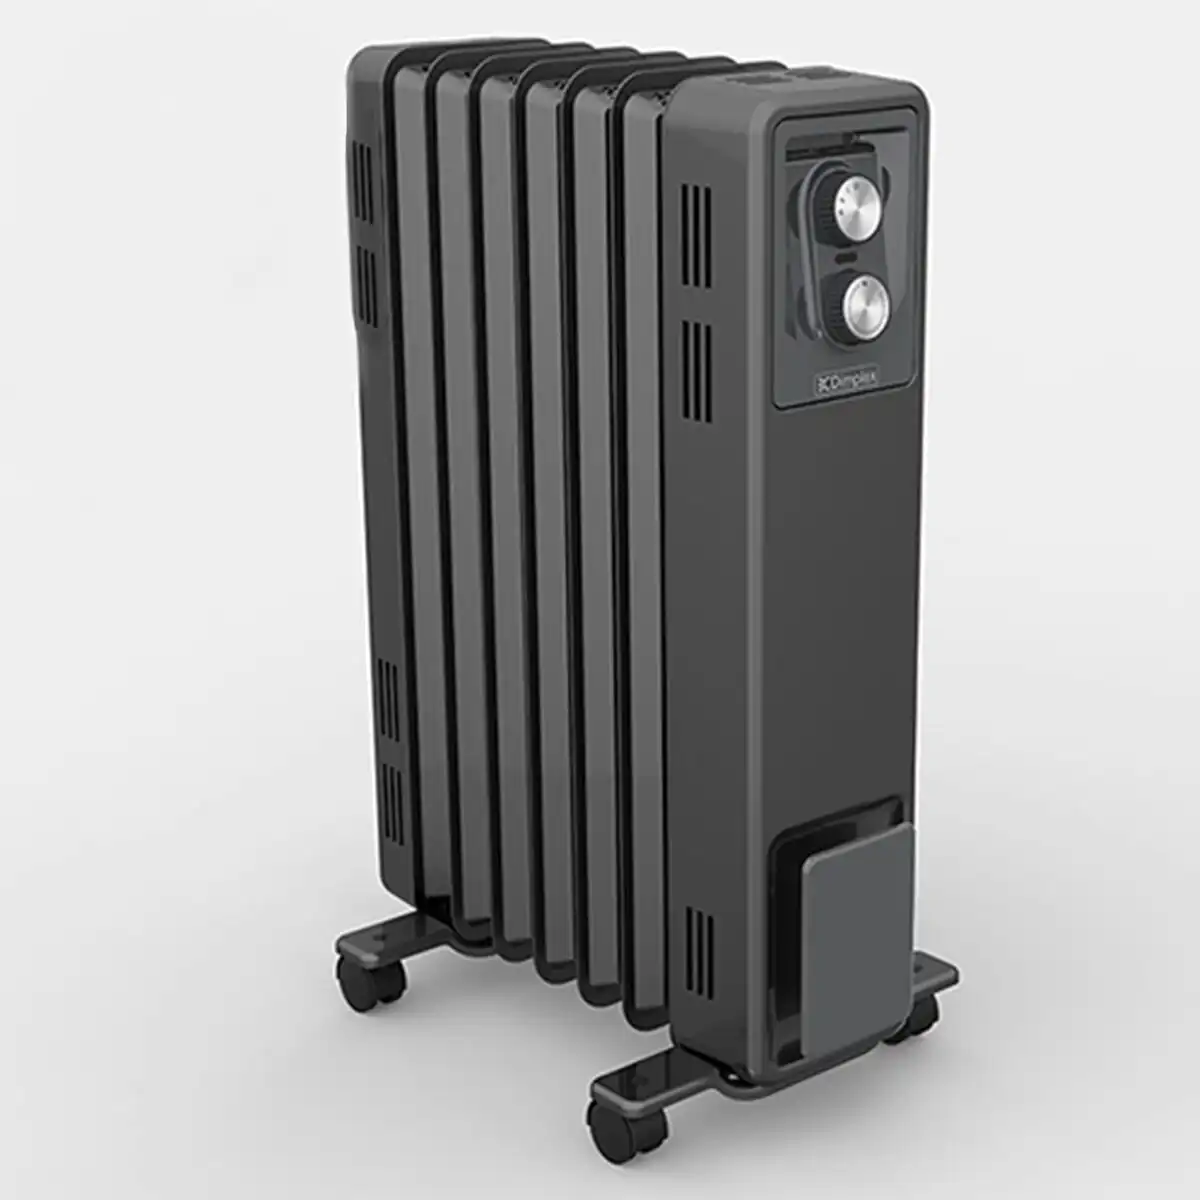 Dimplex 1.5kW Oil Free Column Heater with Thermostat